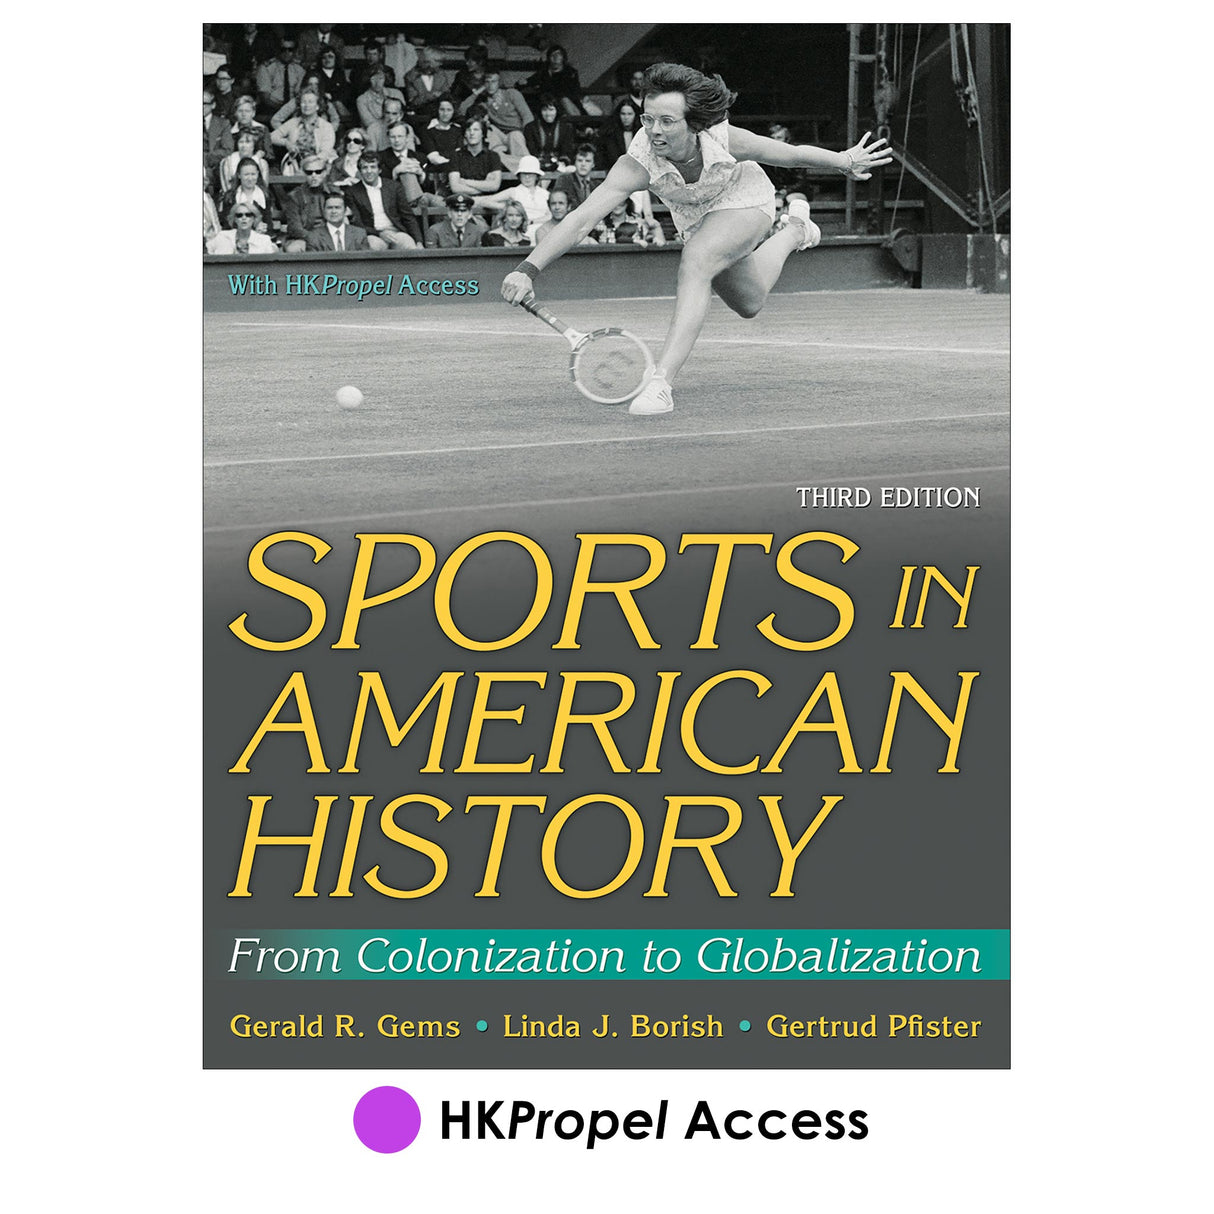 Sports in American History 3rd Edition HKPropel Access